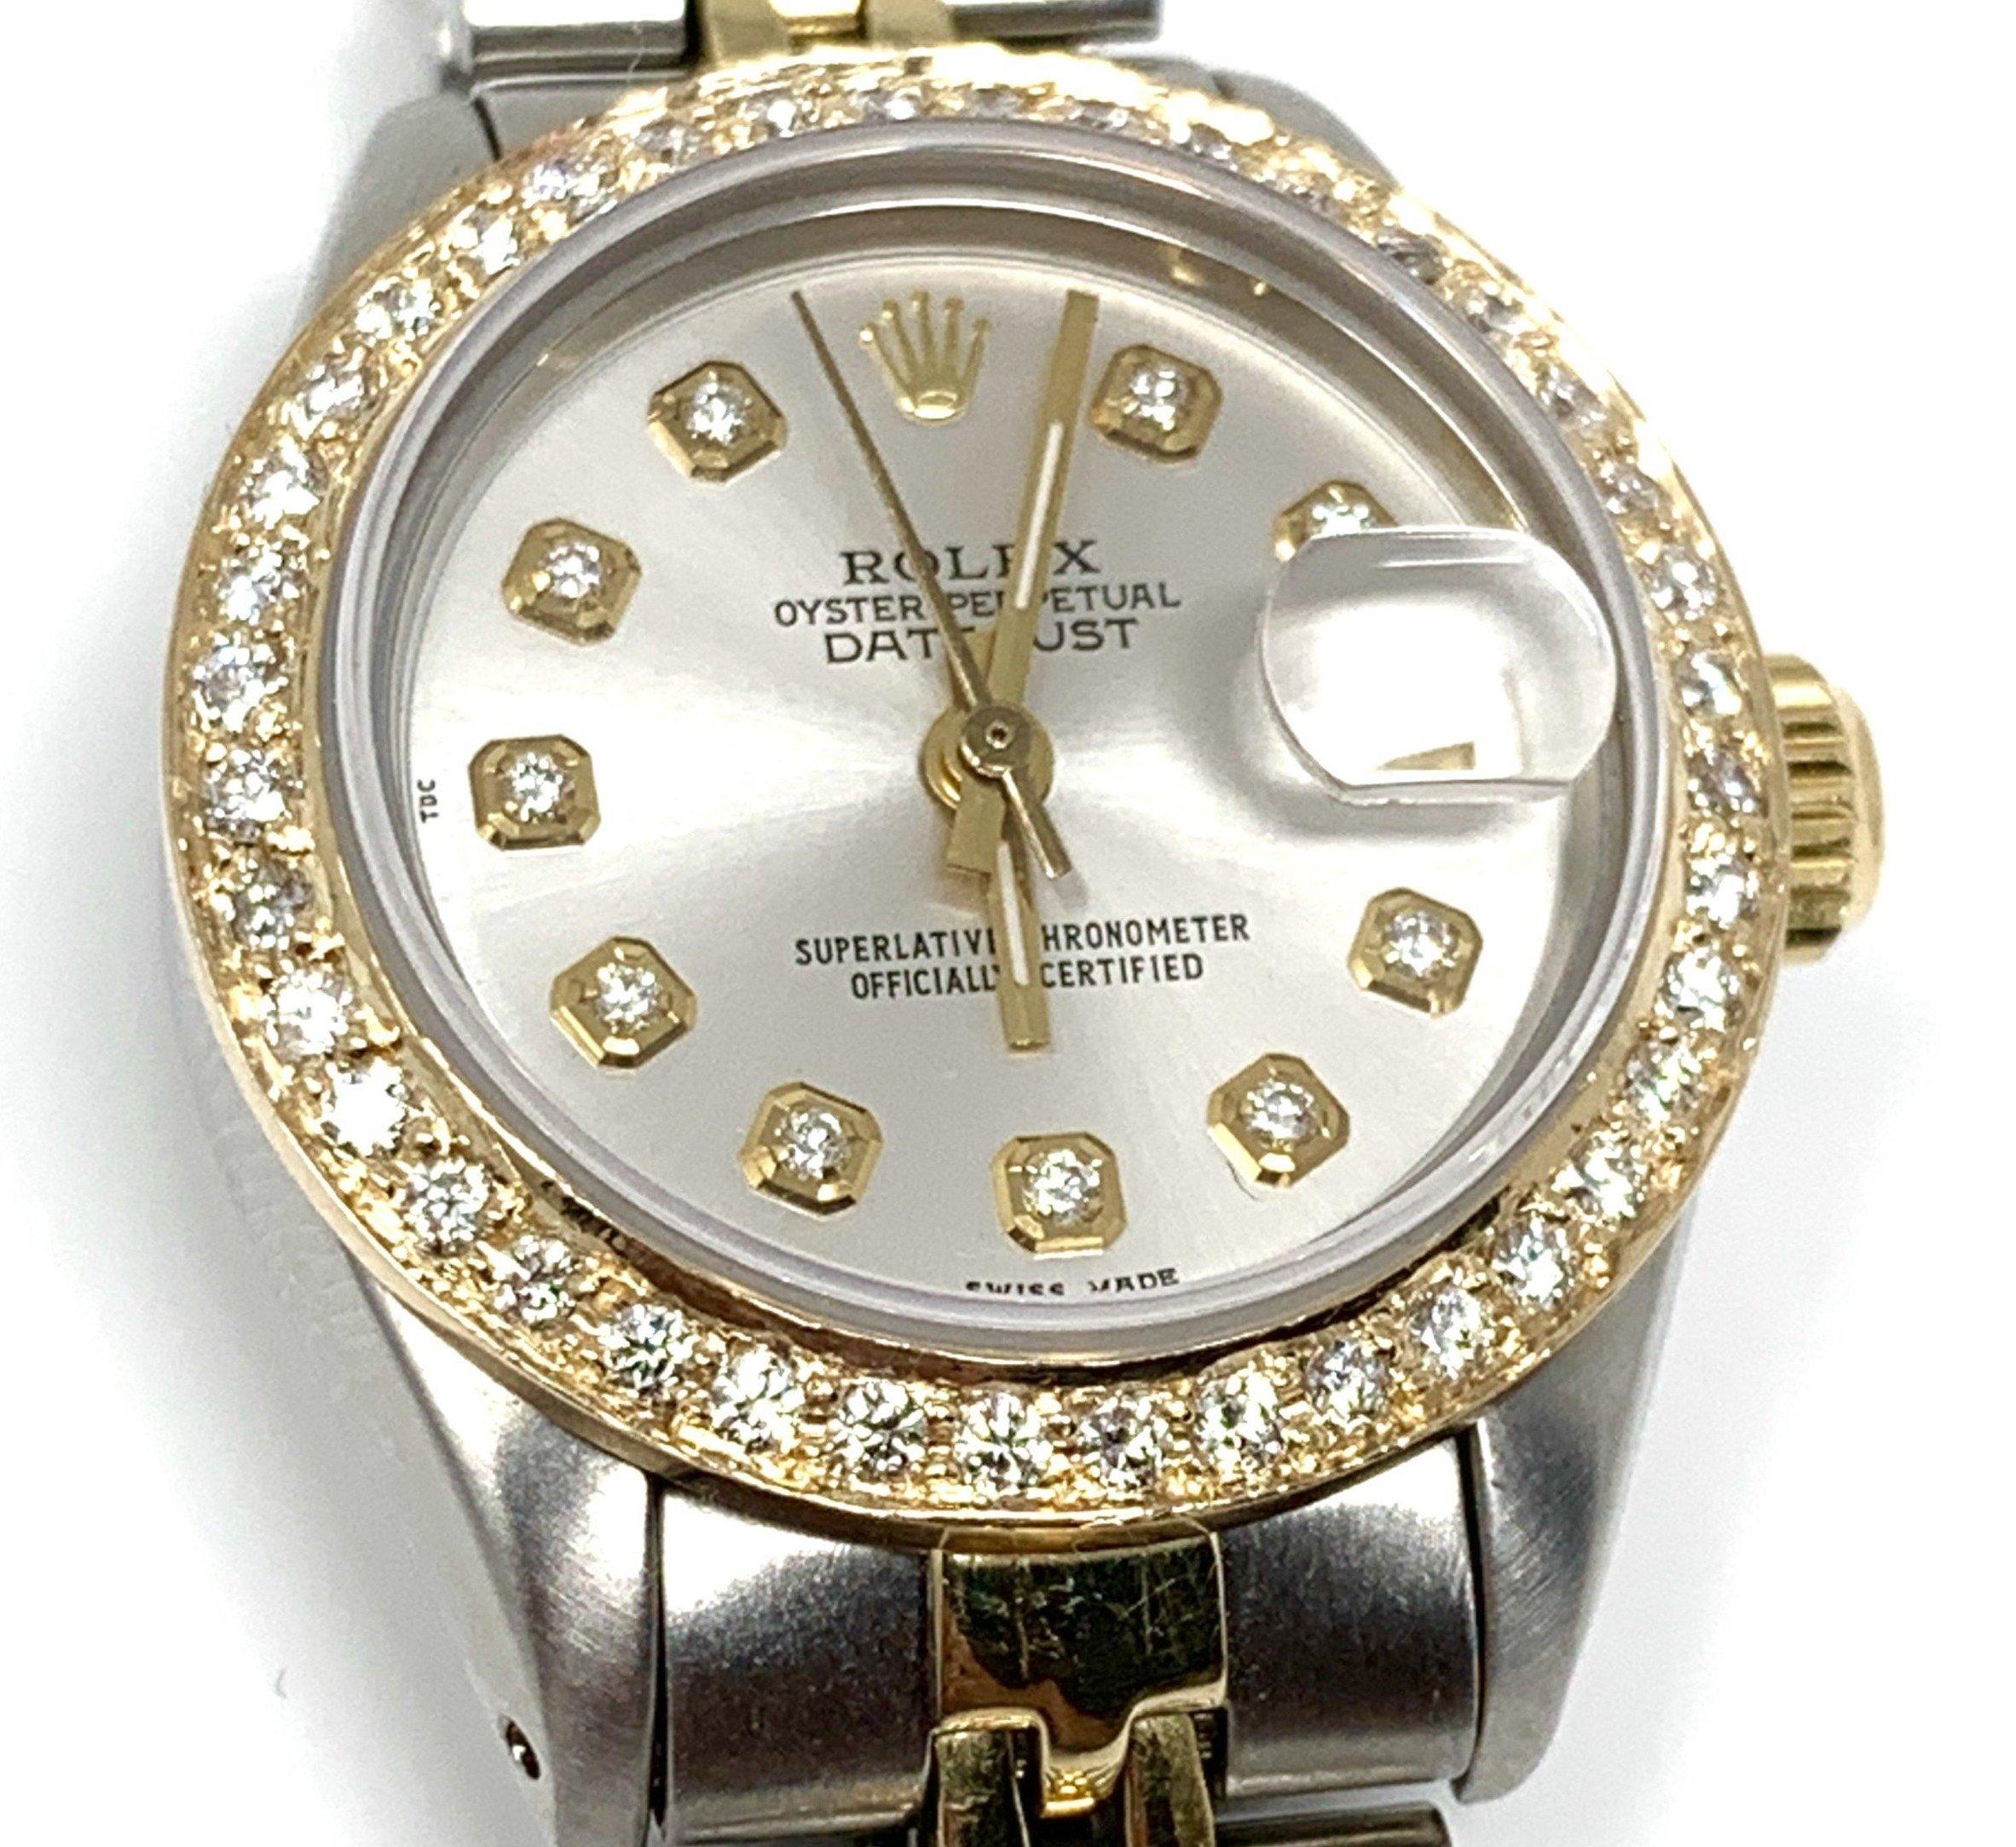 Brand - Rolex
Model - 6917 Datejust 
Gender - Ladies
Case Size - 26mm
Bezel - Steel Diamond
Dial - Refinished Silver Diamond
Crystal - Sapphire 
Movement - Automatic Rolex Cal.2030
Band - Steel Jubilee
Wrist Size - 7 IN

Two Year In House Warranty